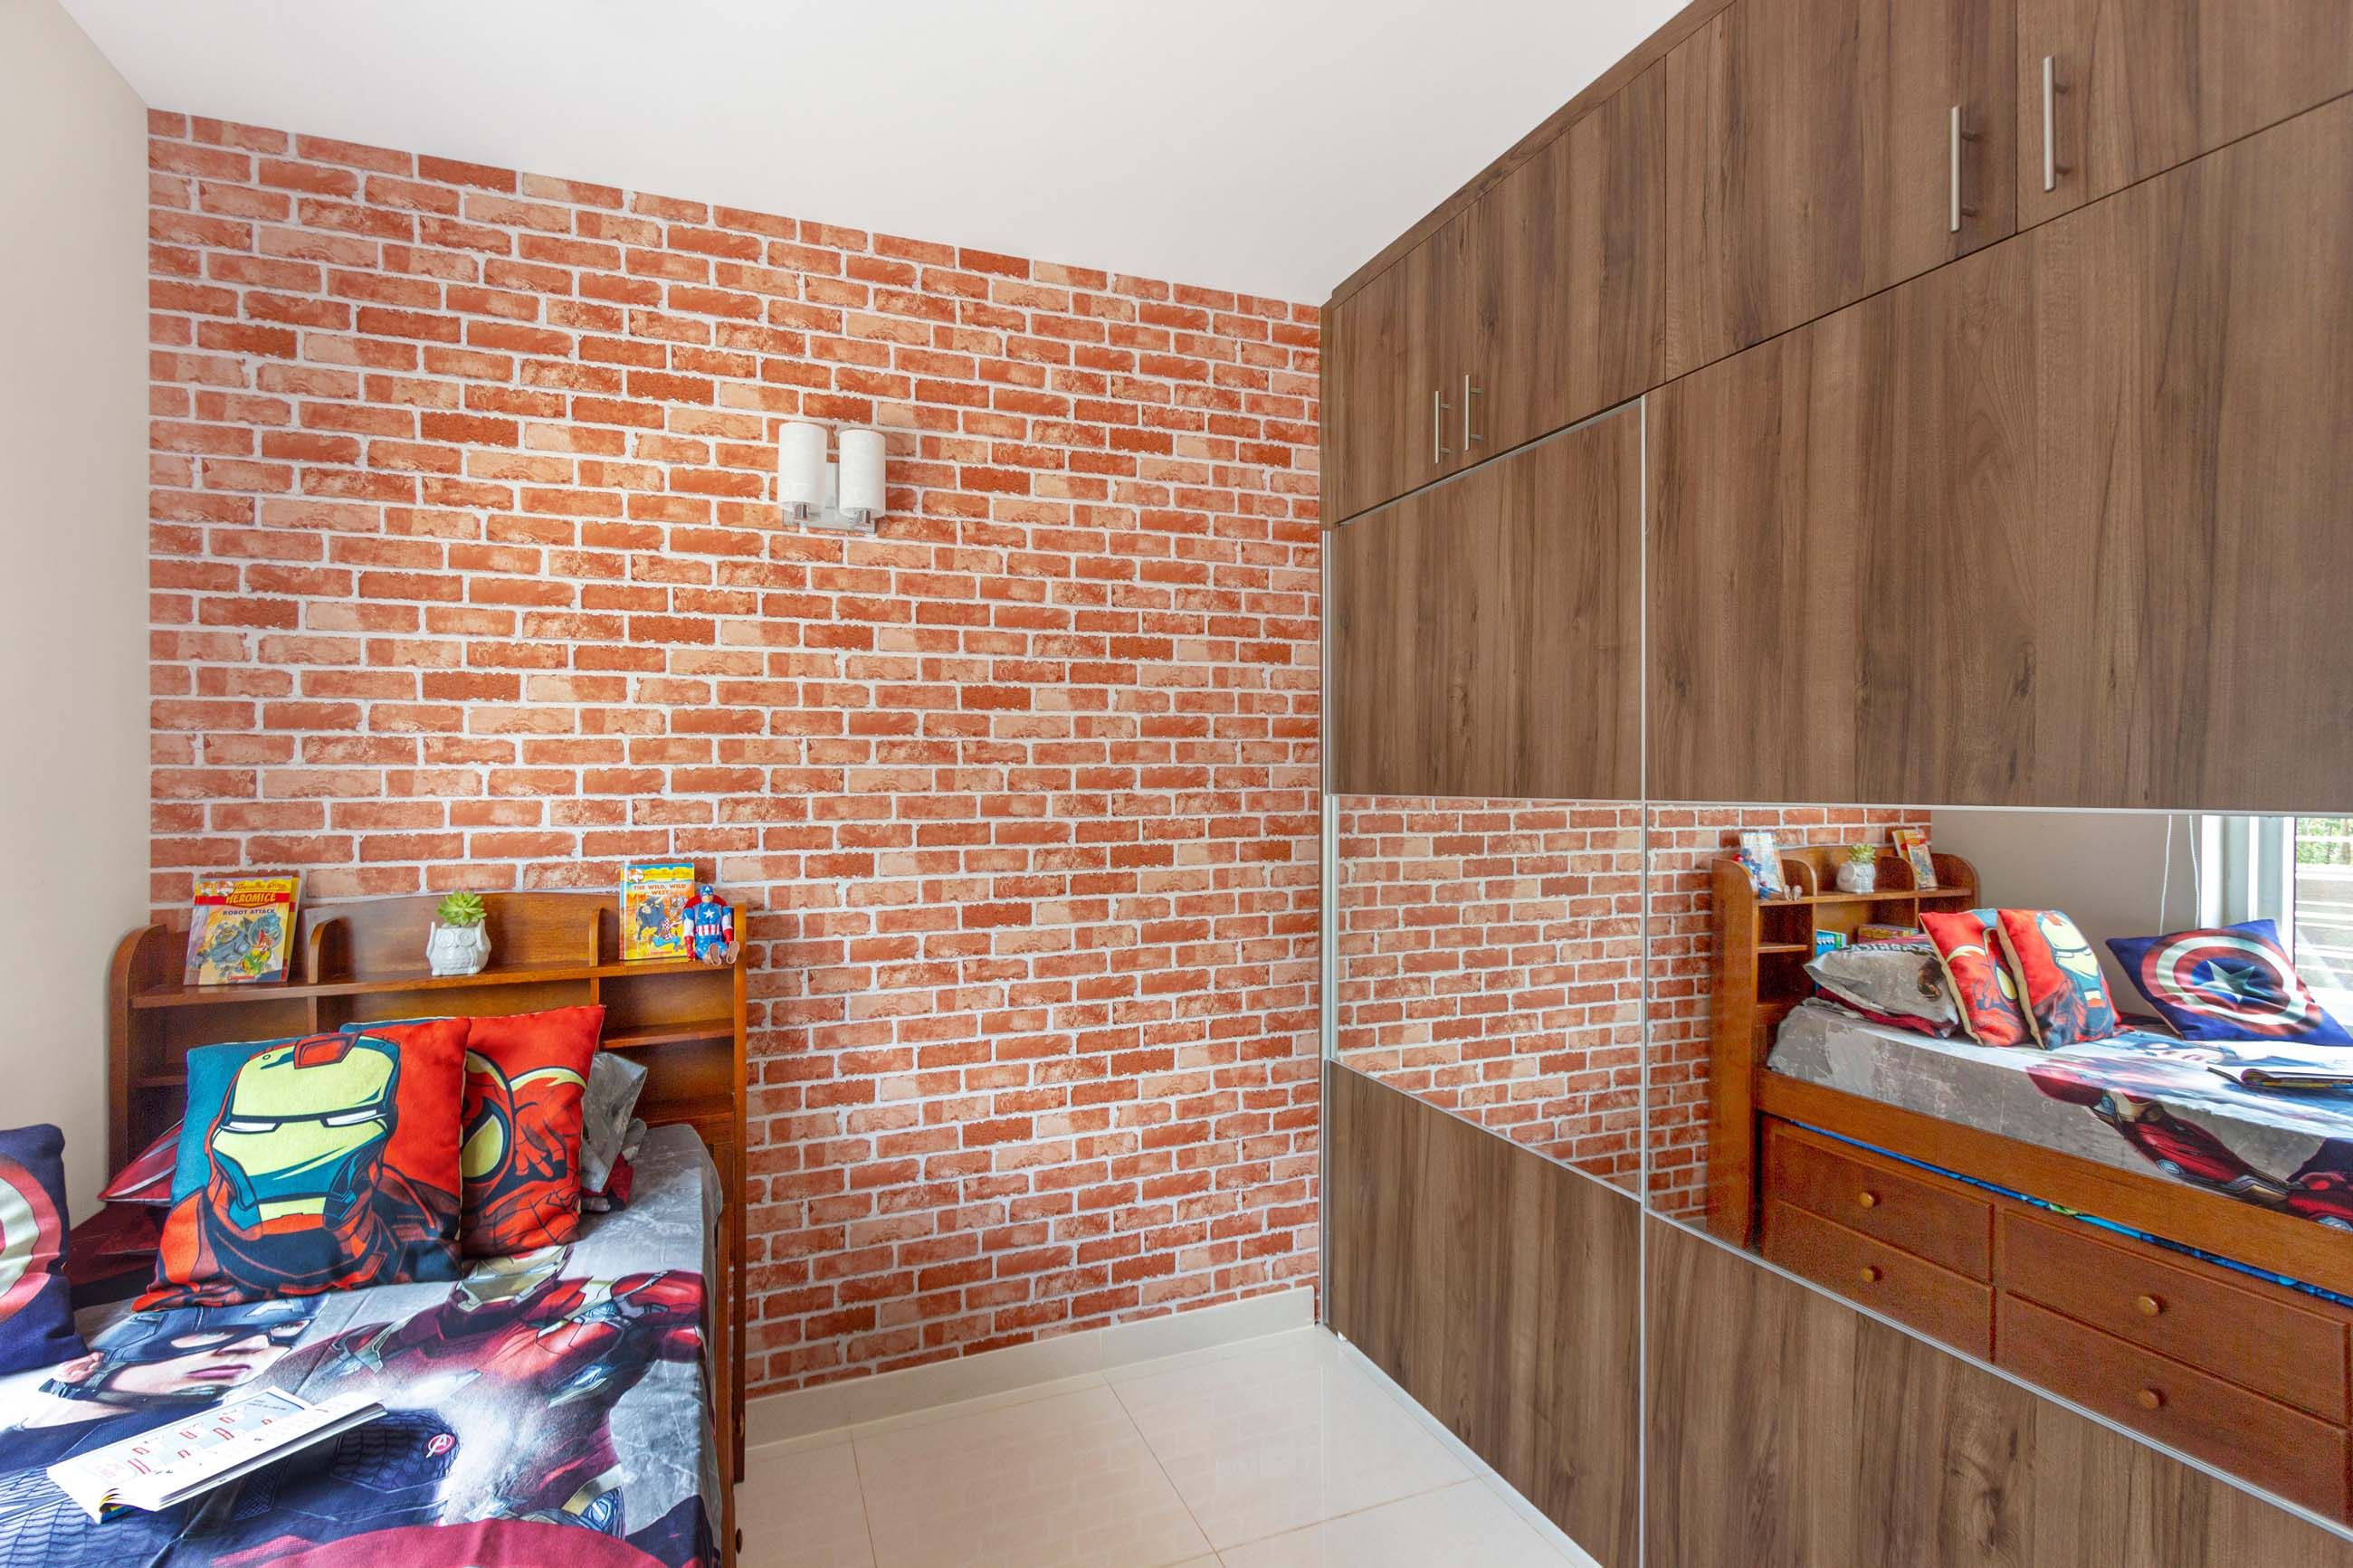 Industrial Boys Room Design With Red Brick Wall And Wooden Wardrobe